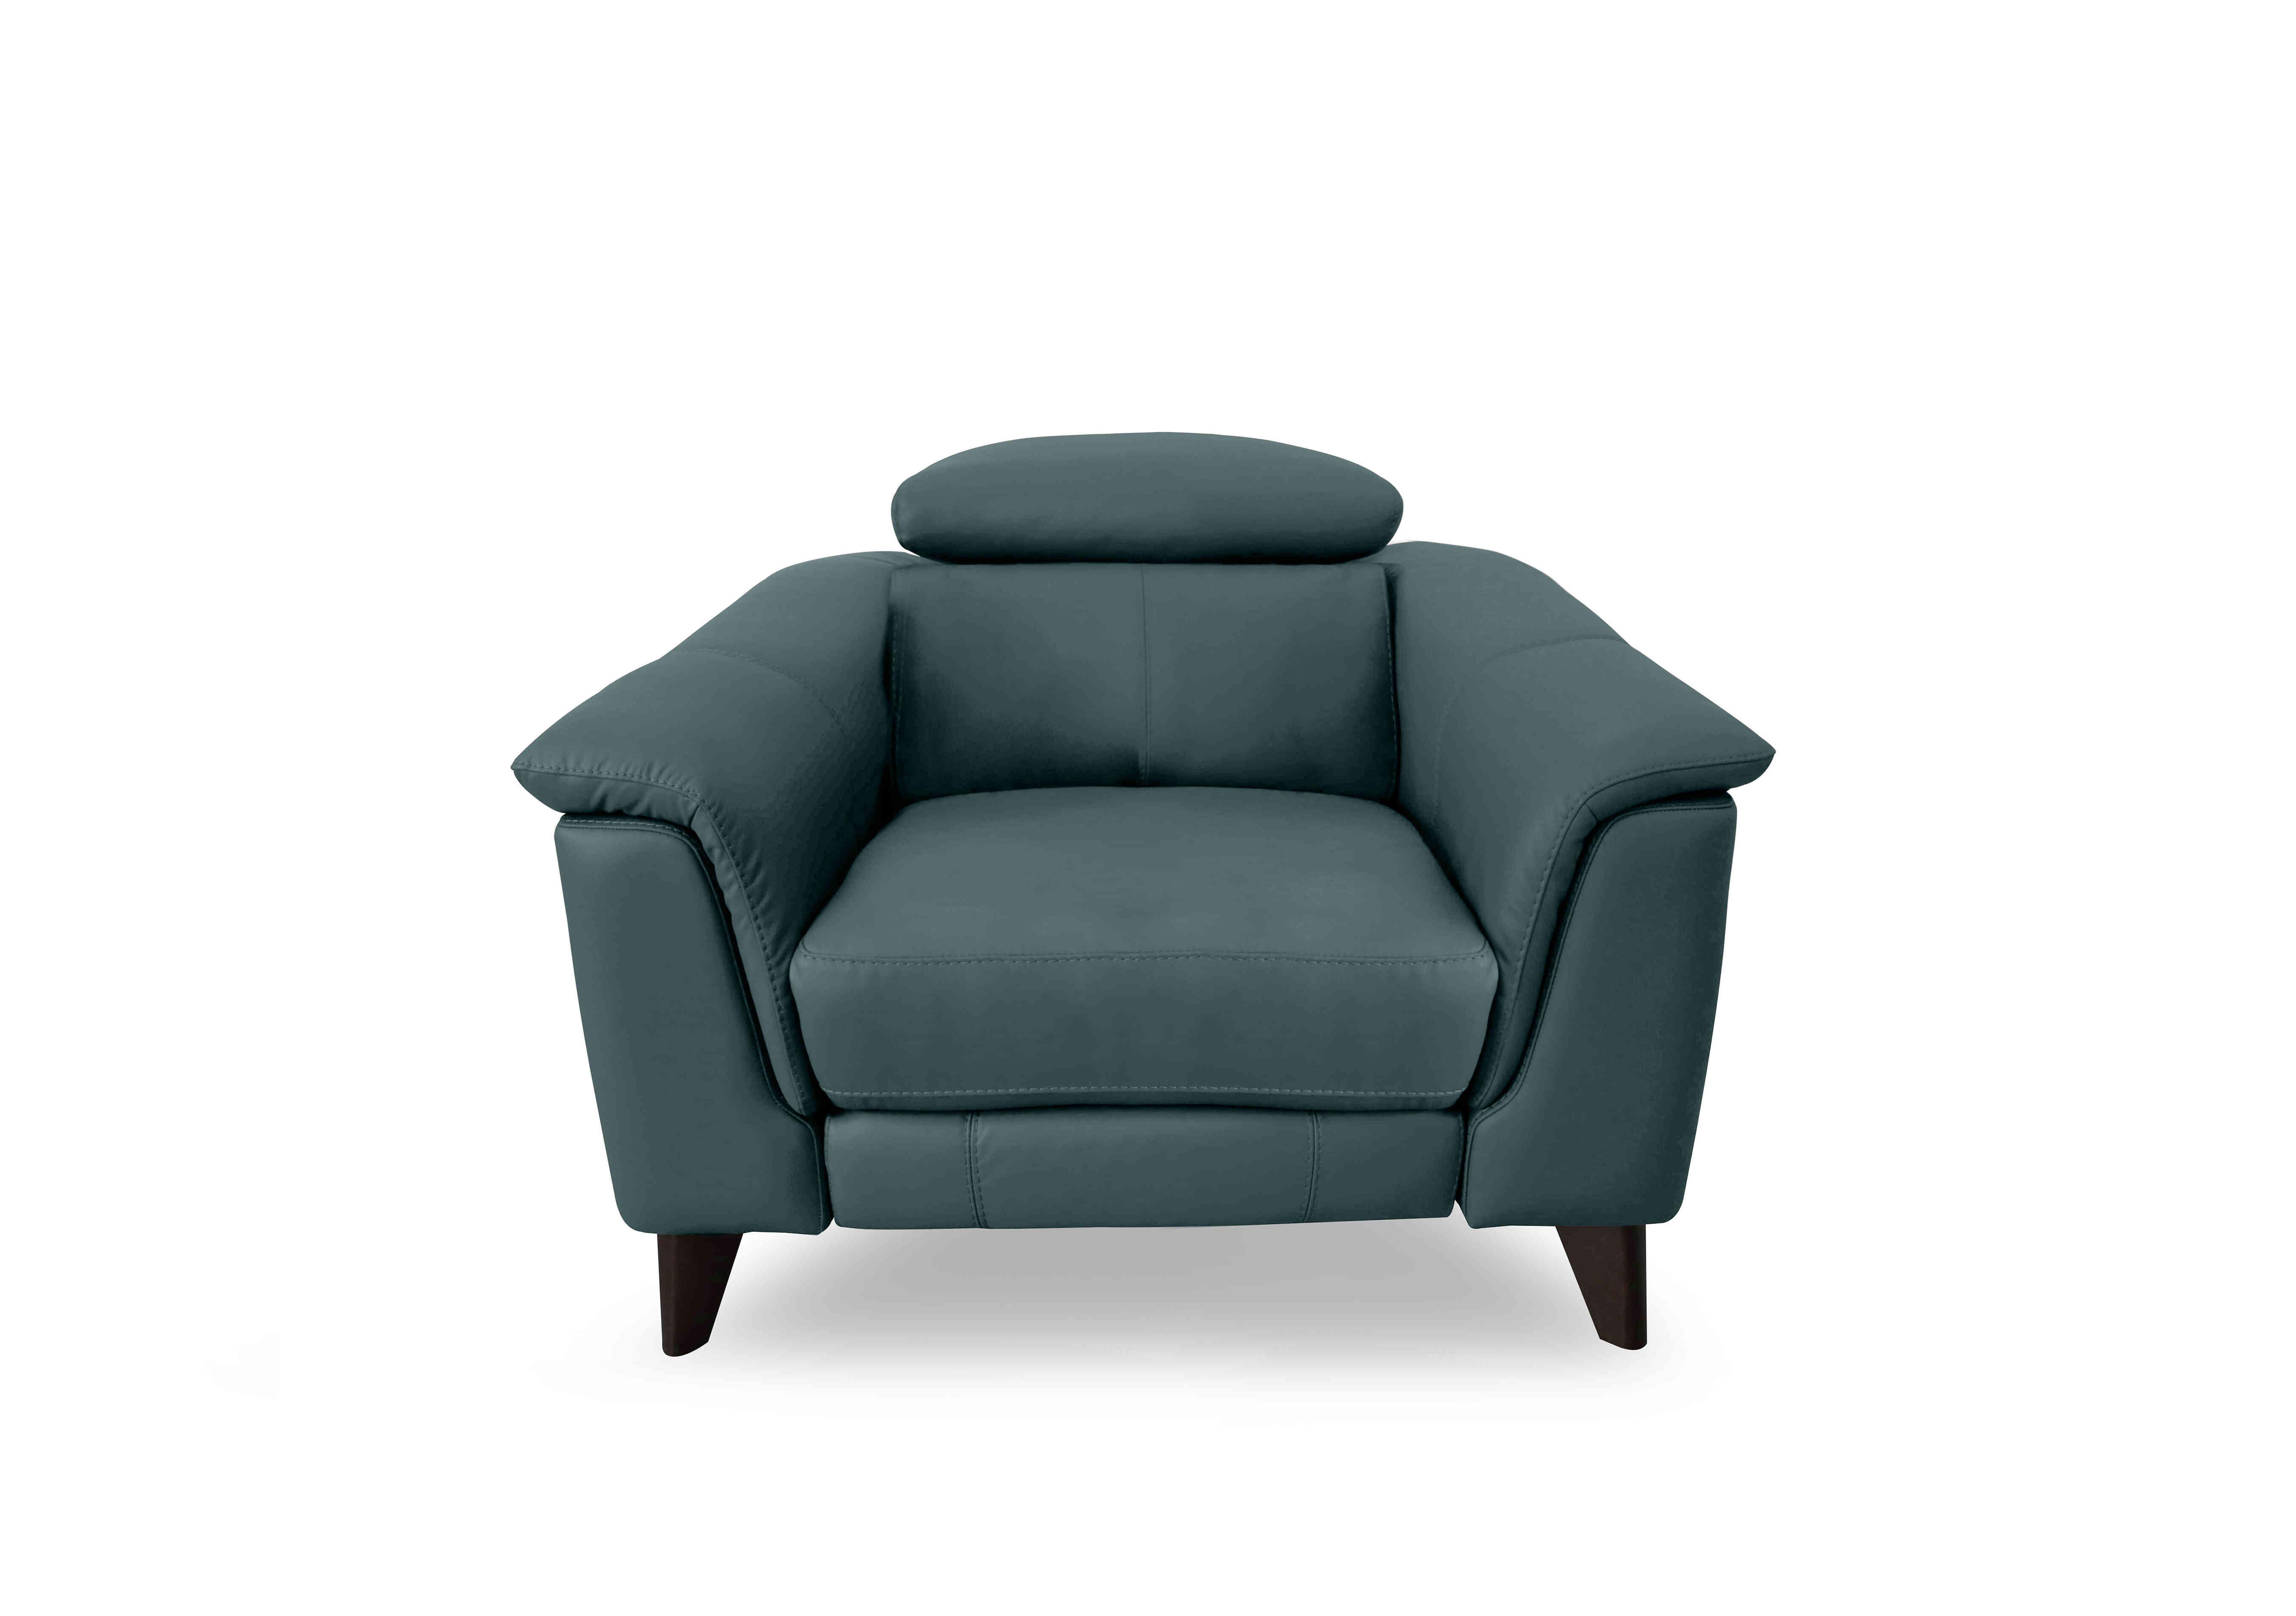 Wade Leather Chair in Bv-301e Lake Green on Furniture Village